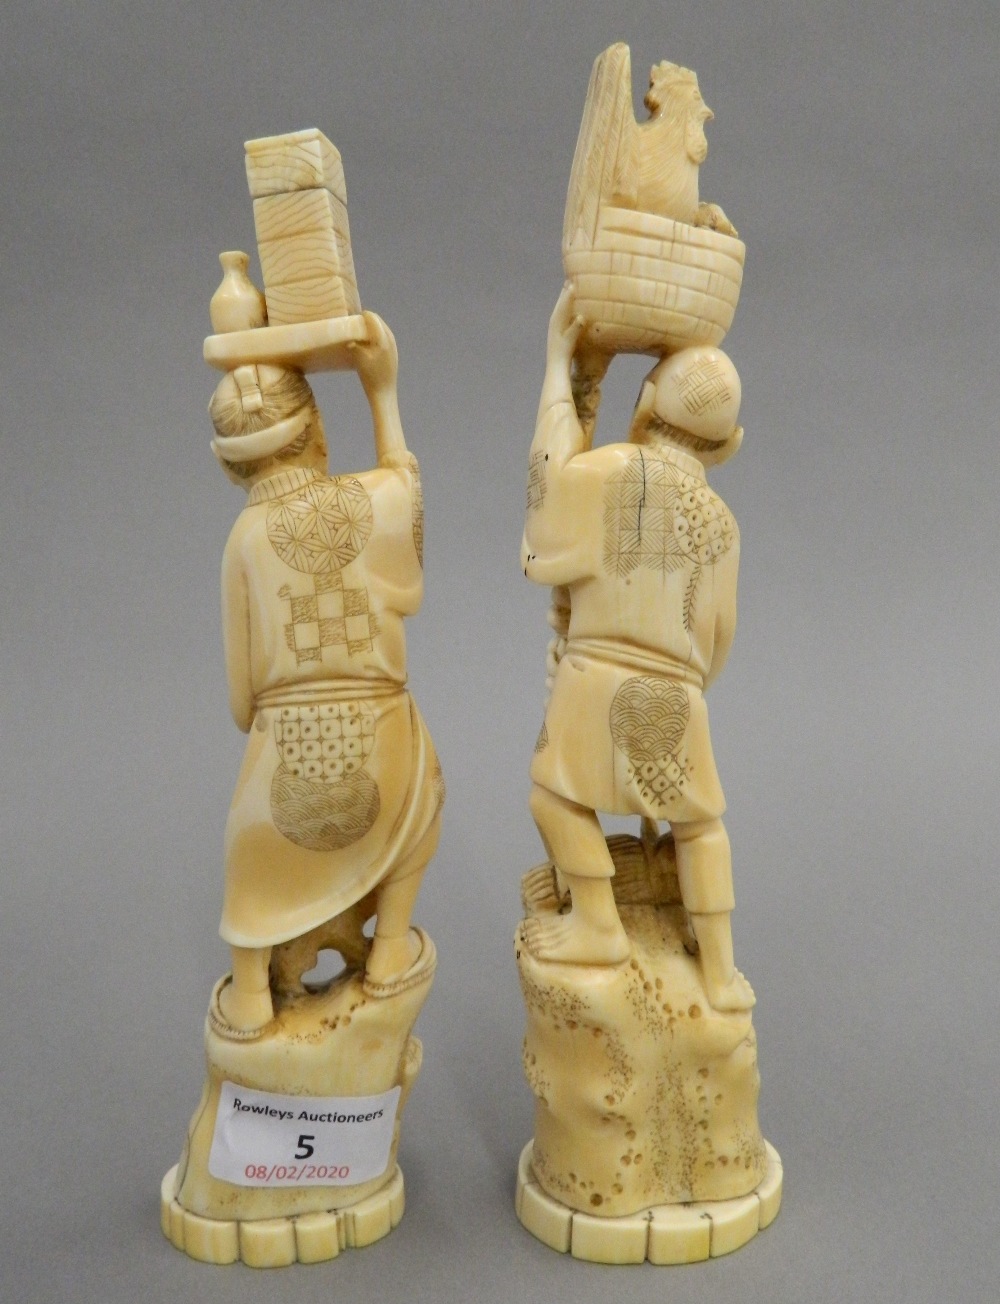 Two late 19th century Japanese carved ivory okimonos. 23 and 21 cm high respectively. - Image 2 of 2